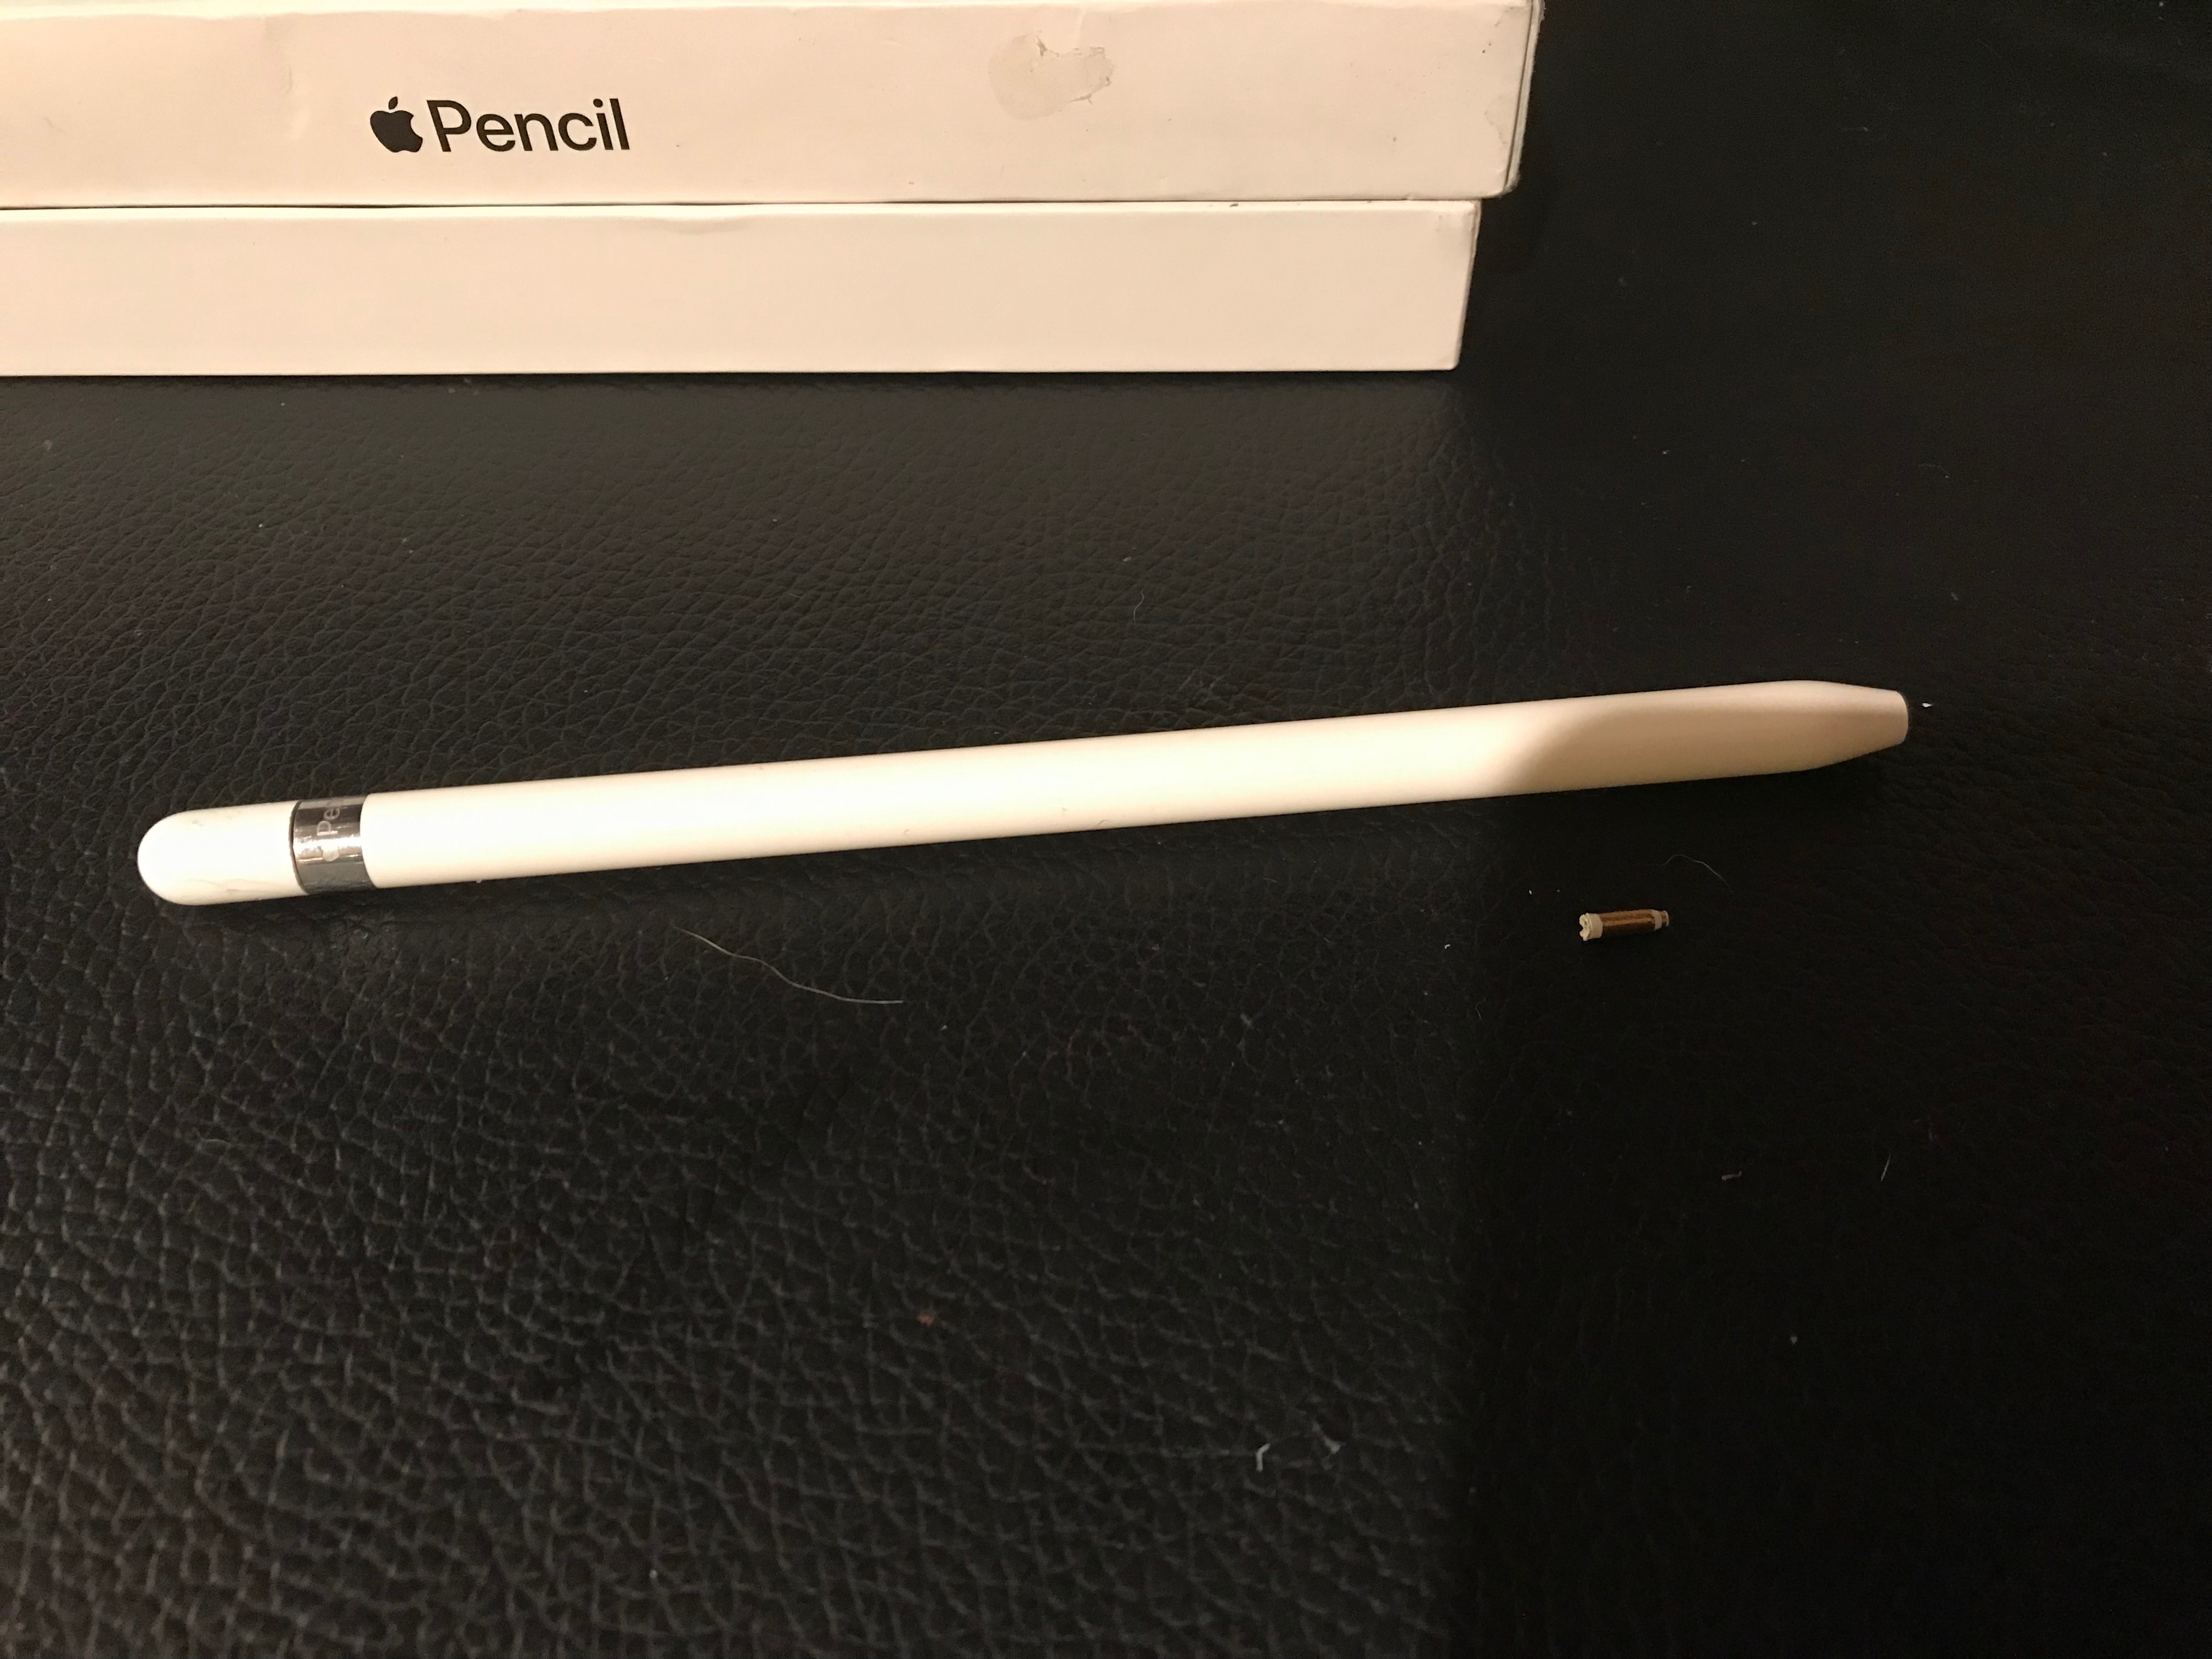 Will Apple fix my Apple Pencil for free?